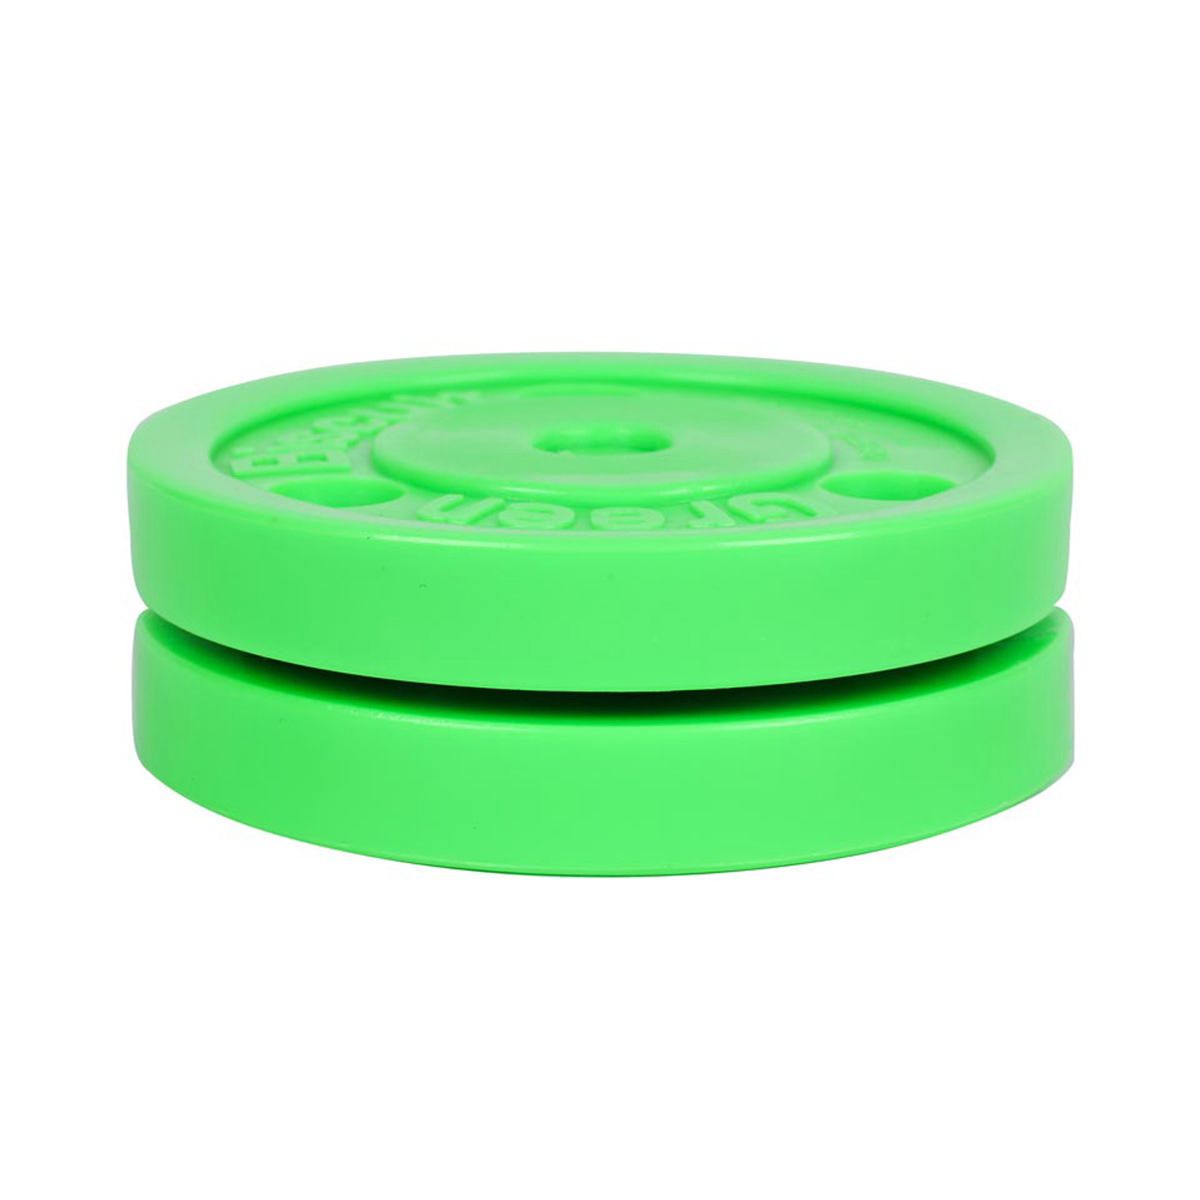 Toronto Maple Leafs Green Biscuit Training Puck